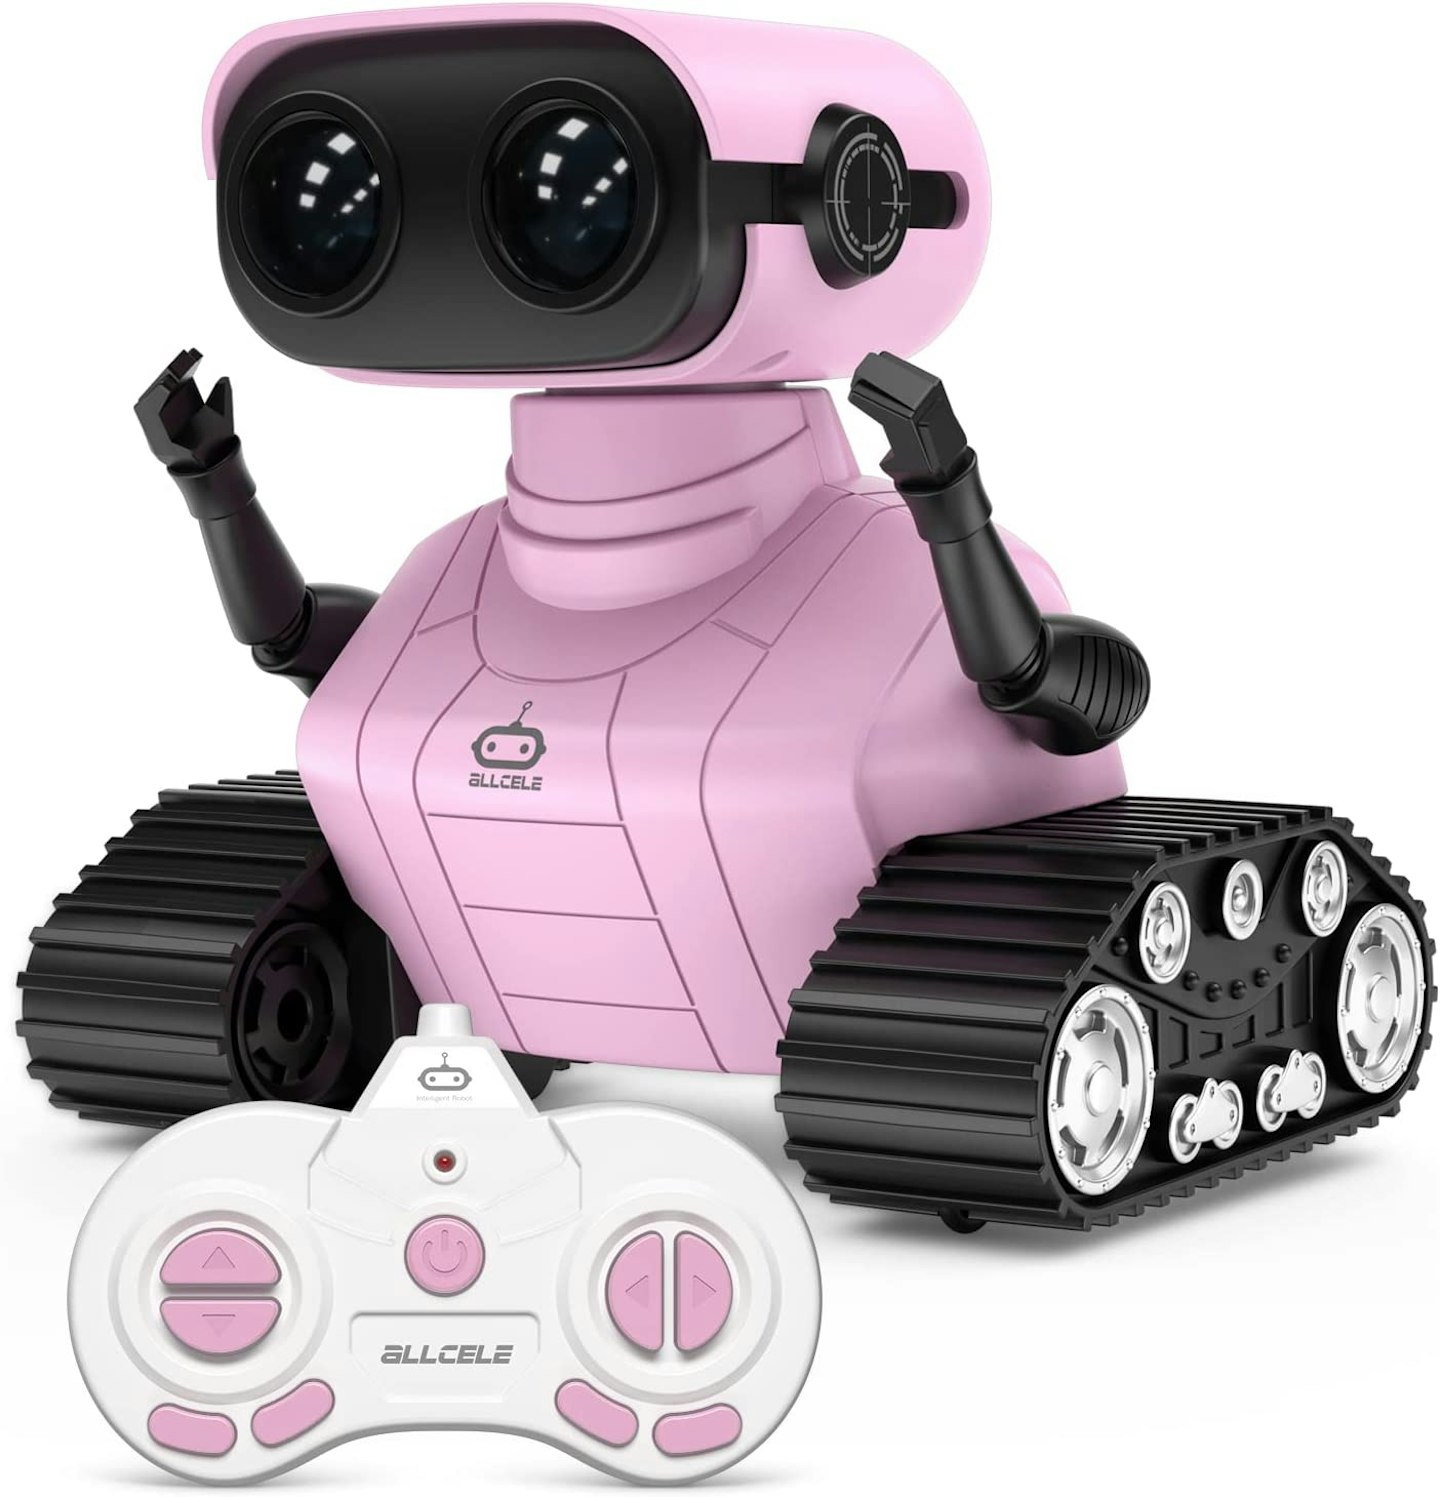 ALLCELE Robot Toys, Rechargeable Kids RC Robots for Girls & Boys